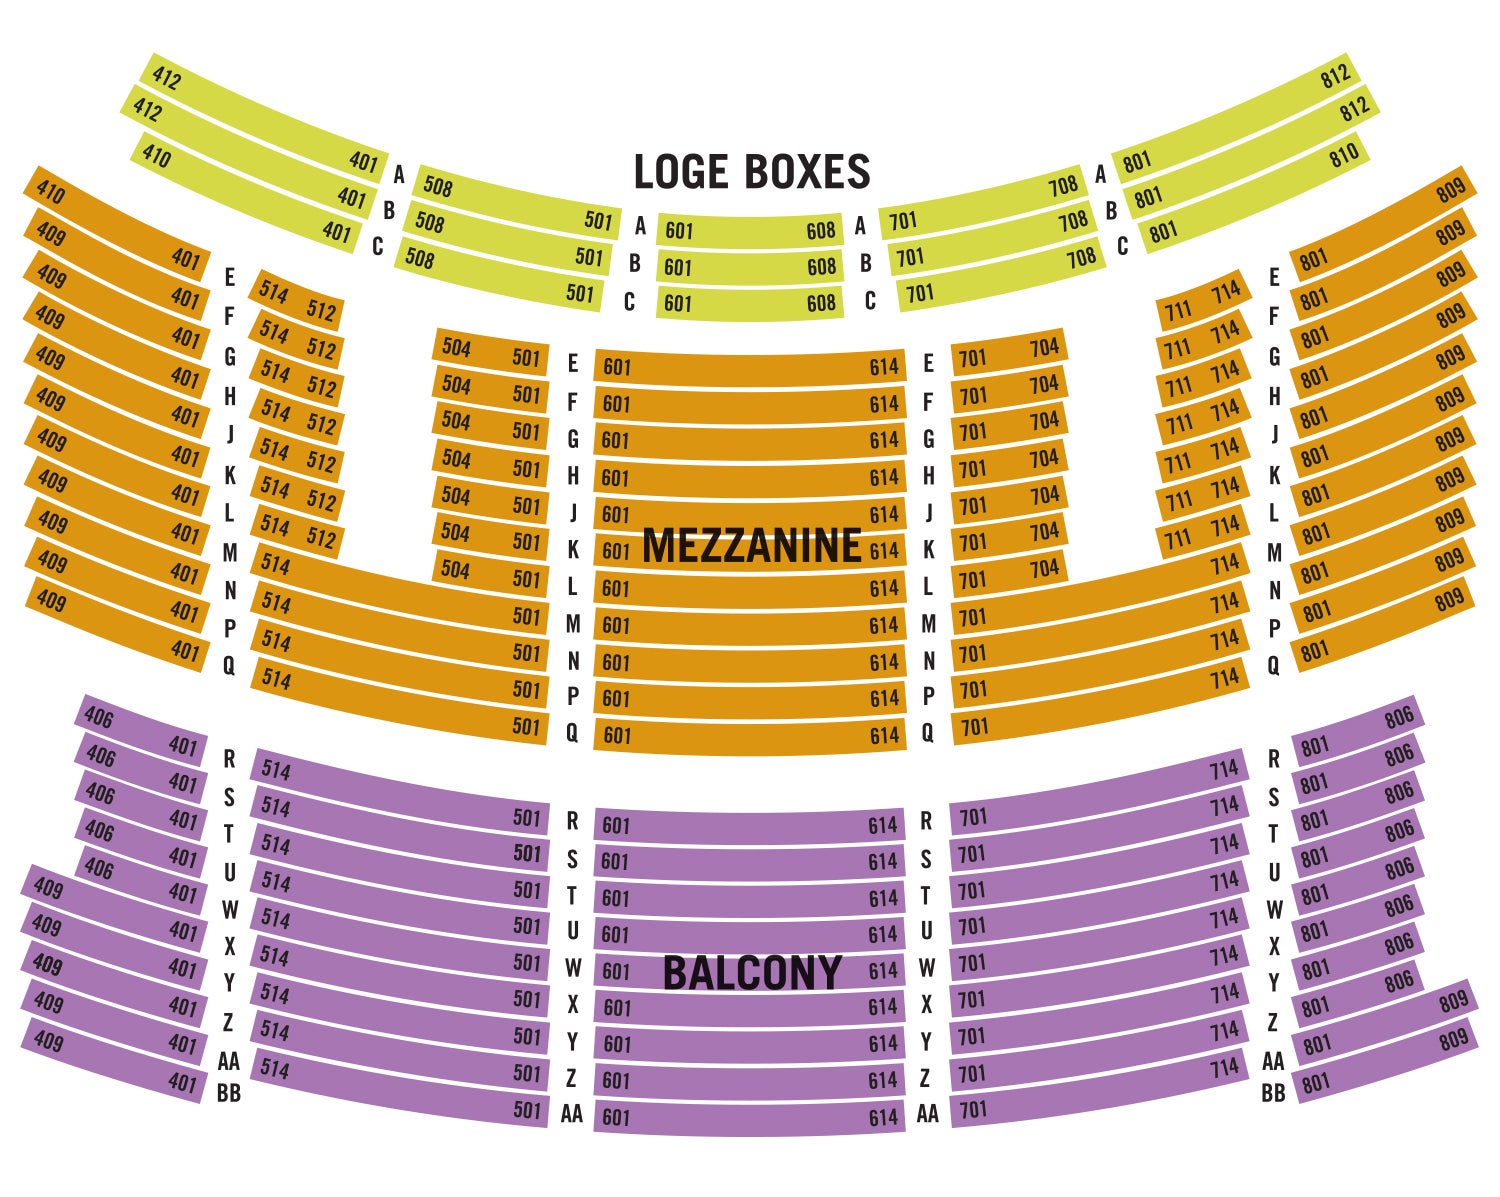 Keybank State Theatre Seating Chart Playhouse Square